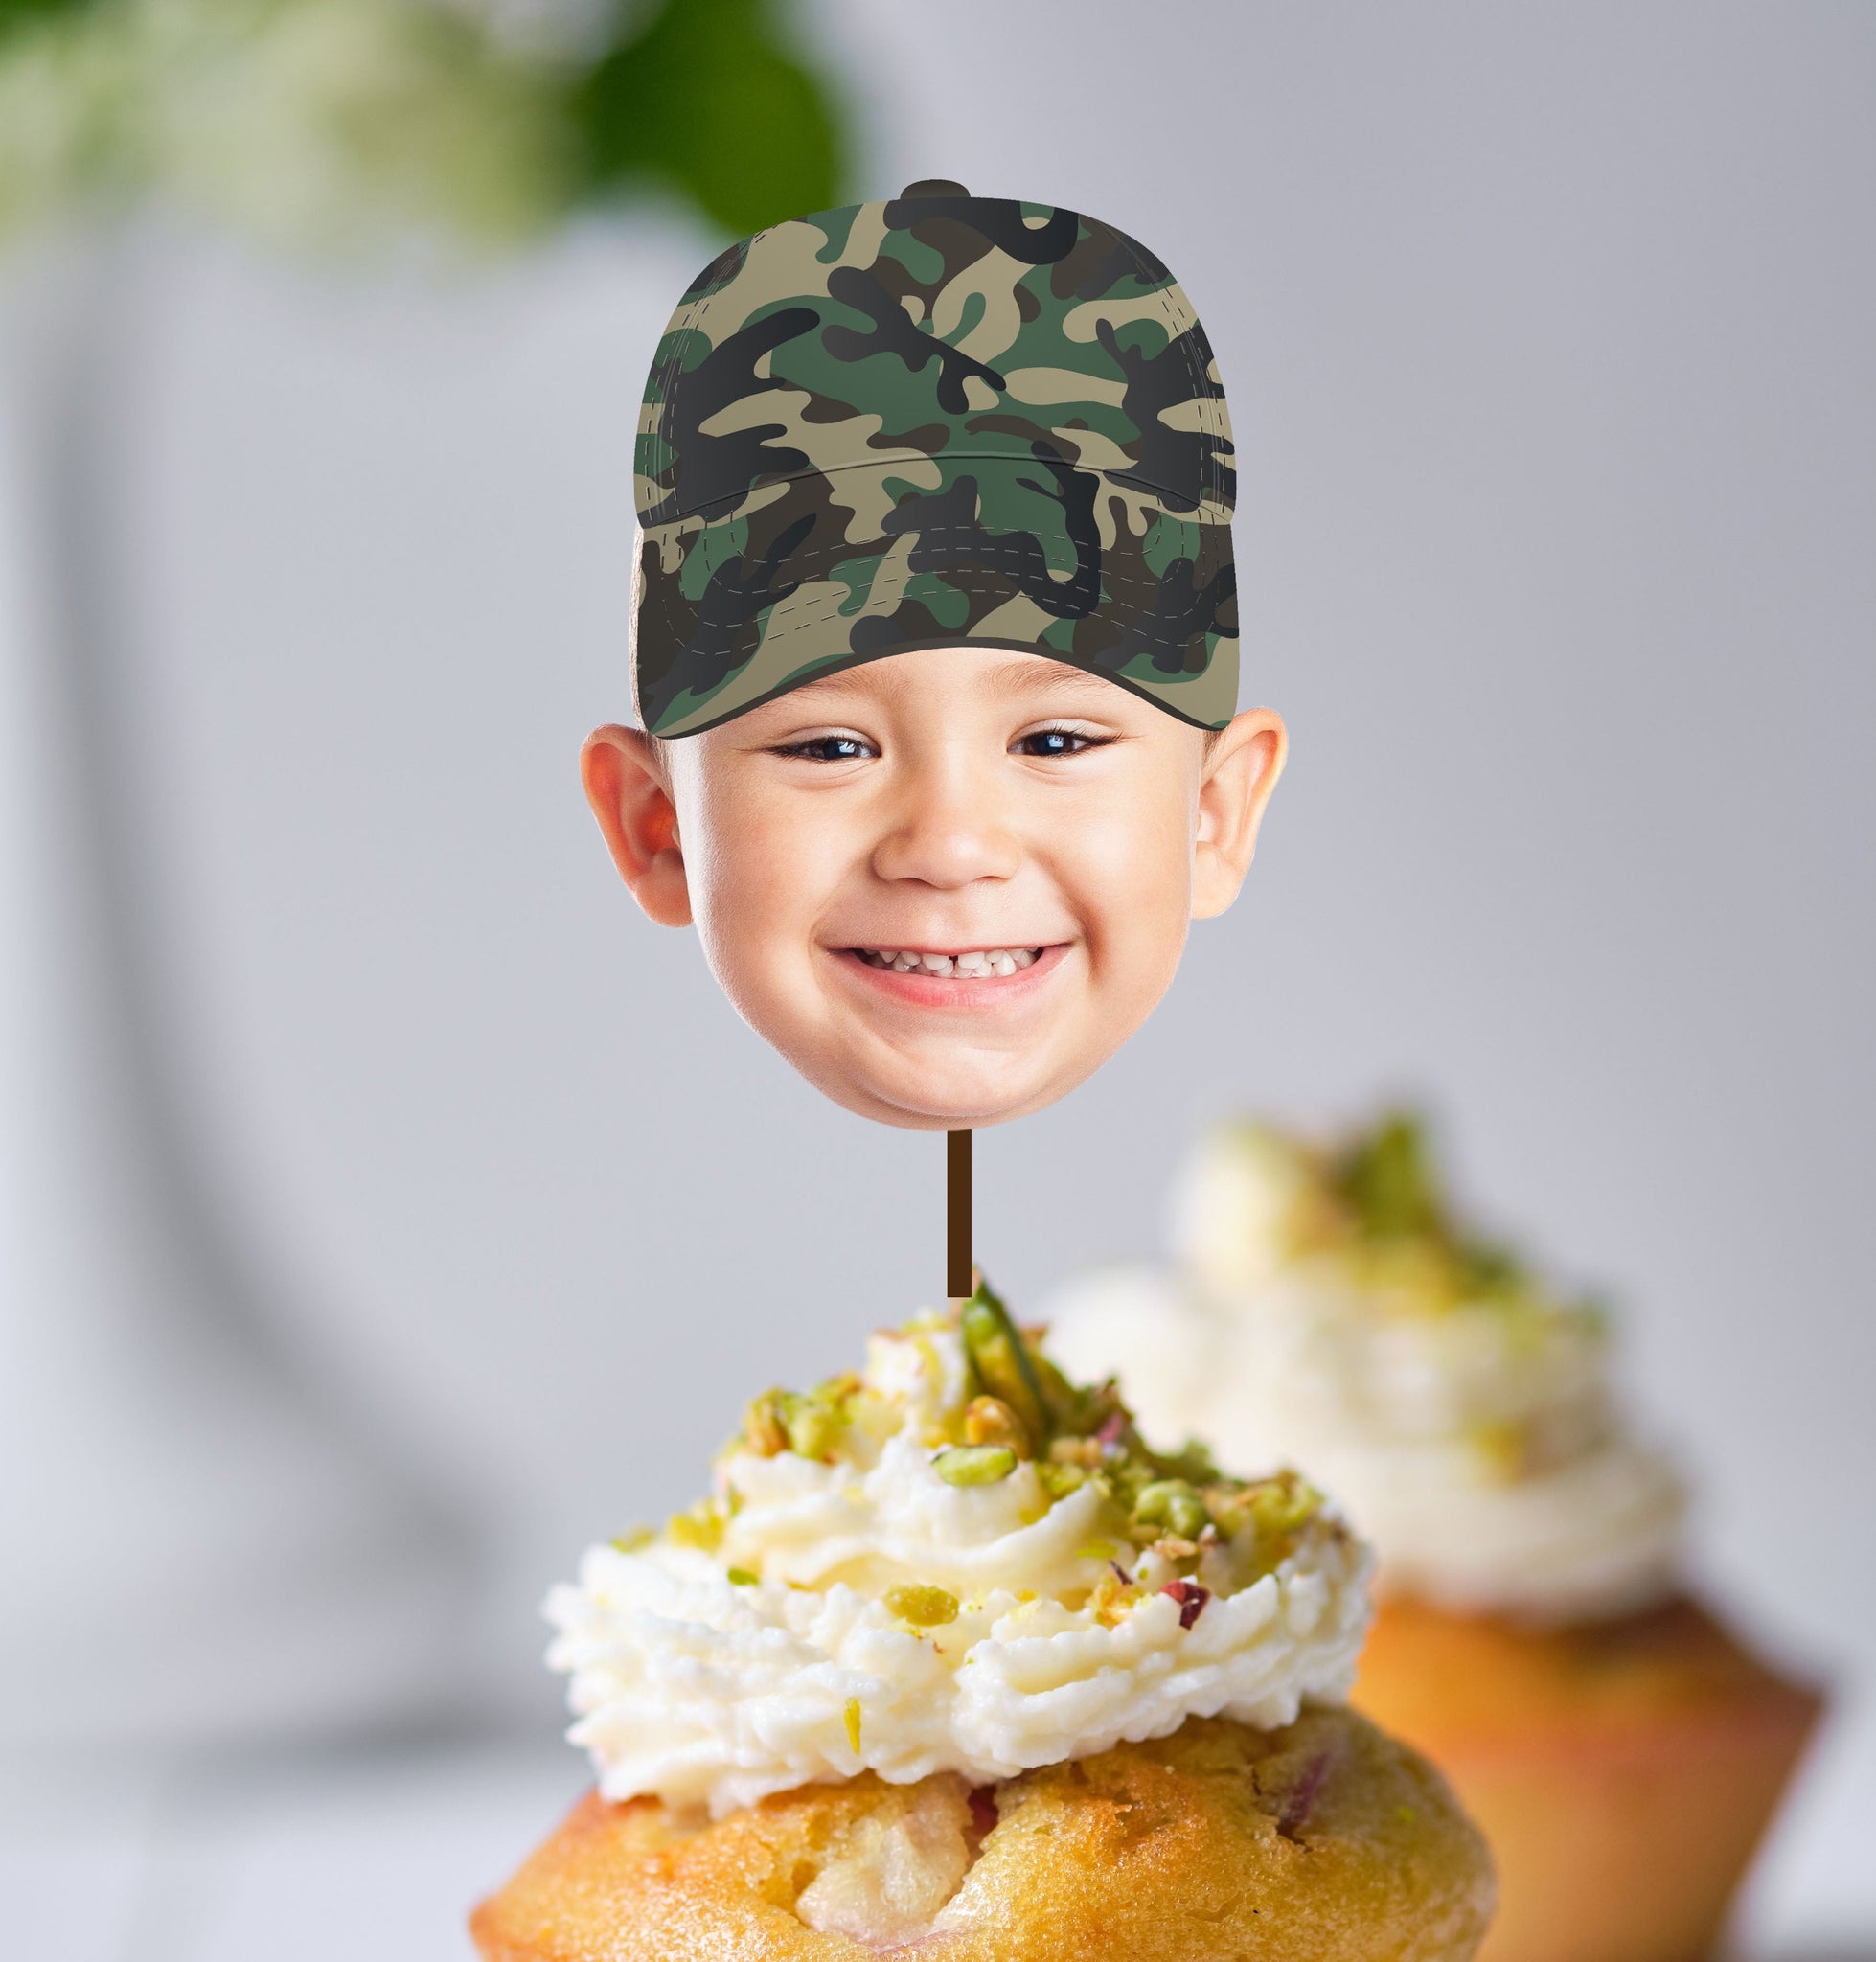 Cupcake Camouflage Cap, Army Cupcake Toppers, Cupcake Military Toppers, Cupcake Toppers Printable, Baseball Cupcake Toppers, Digital Decor